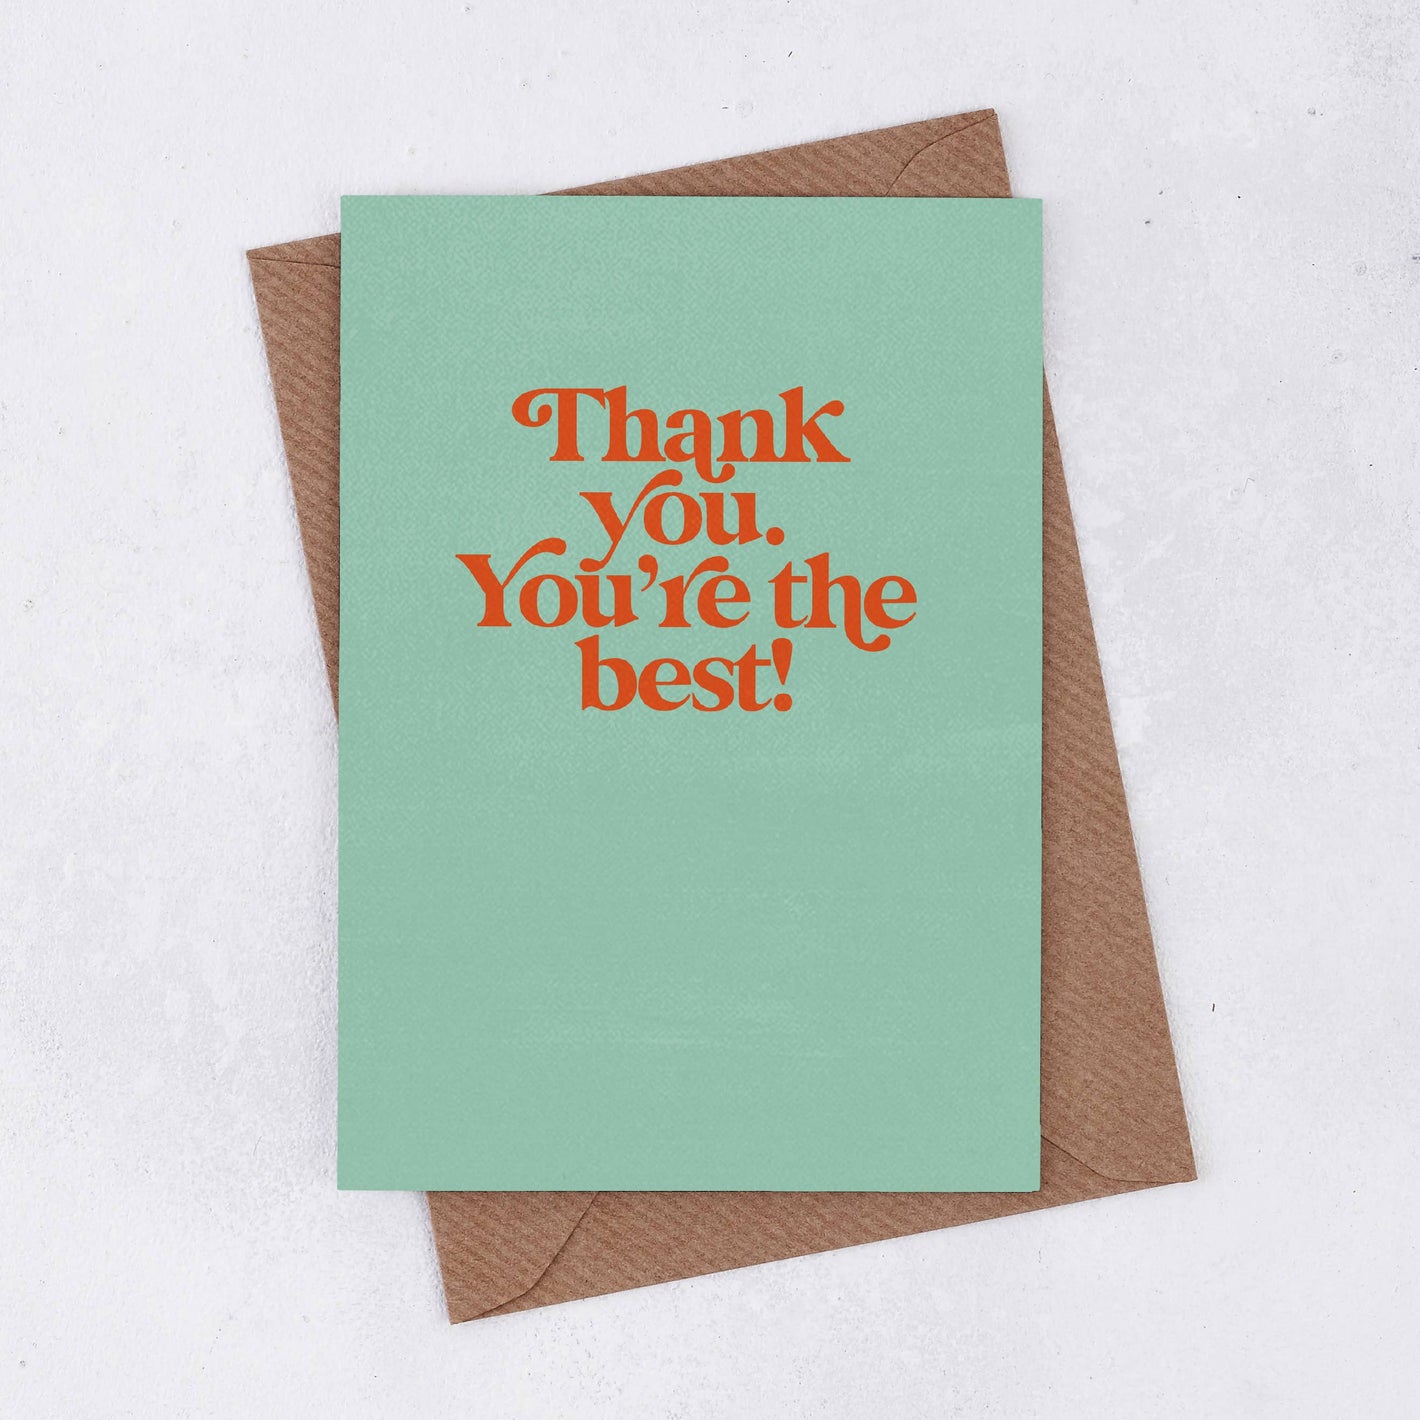 'Thank you. You're the best' Retro Greetings Card